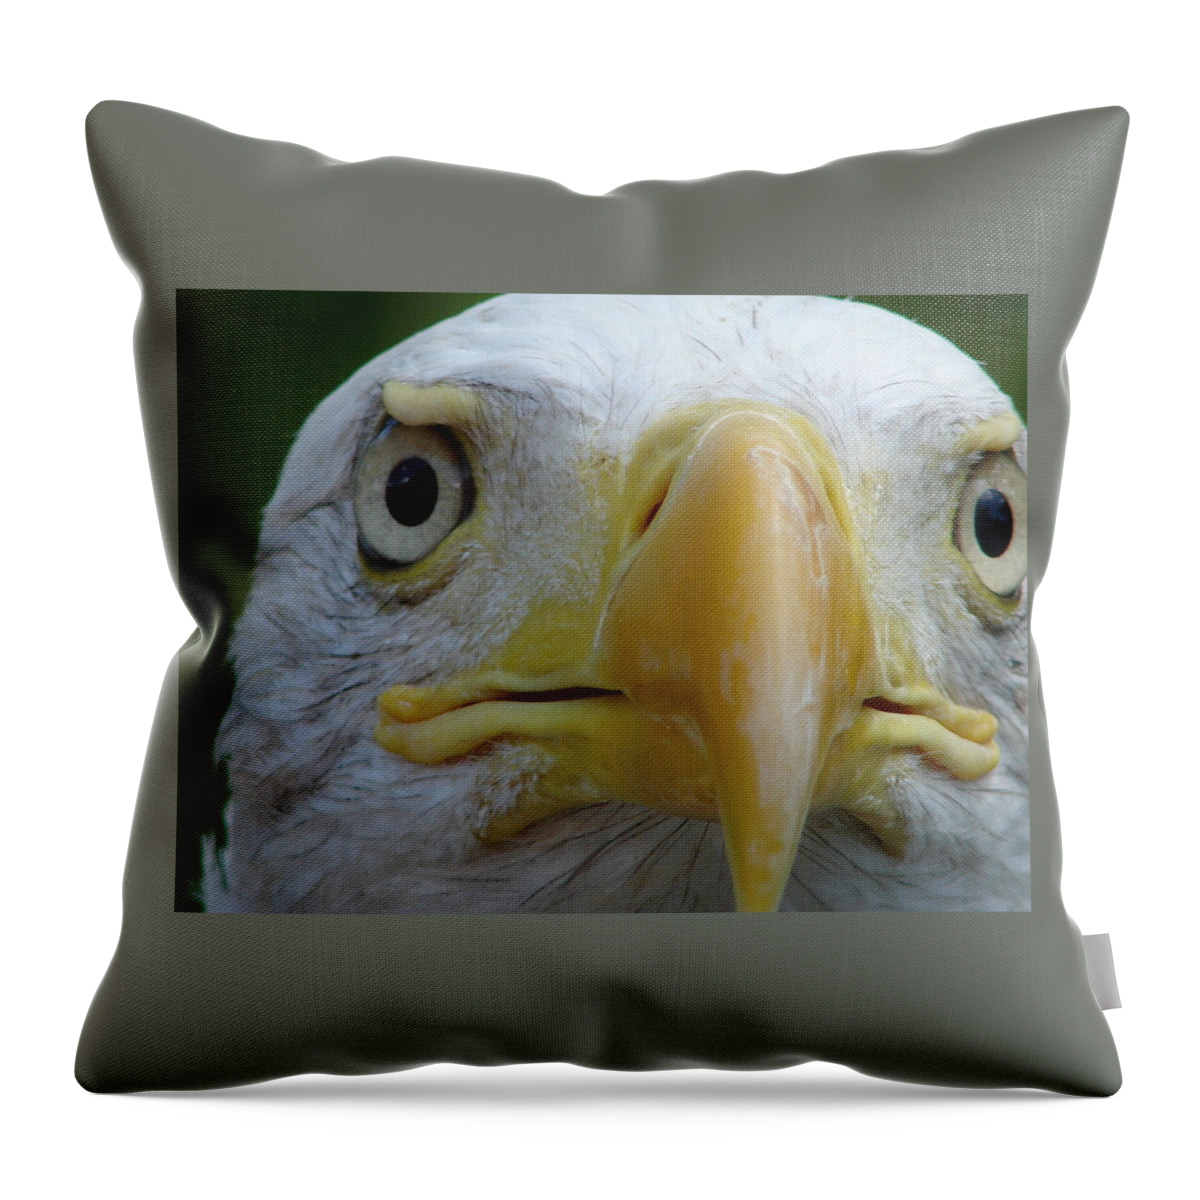 American Bald Eagle Throw Pillow featuring the photograph American Bald Eagle by Randy J Heath